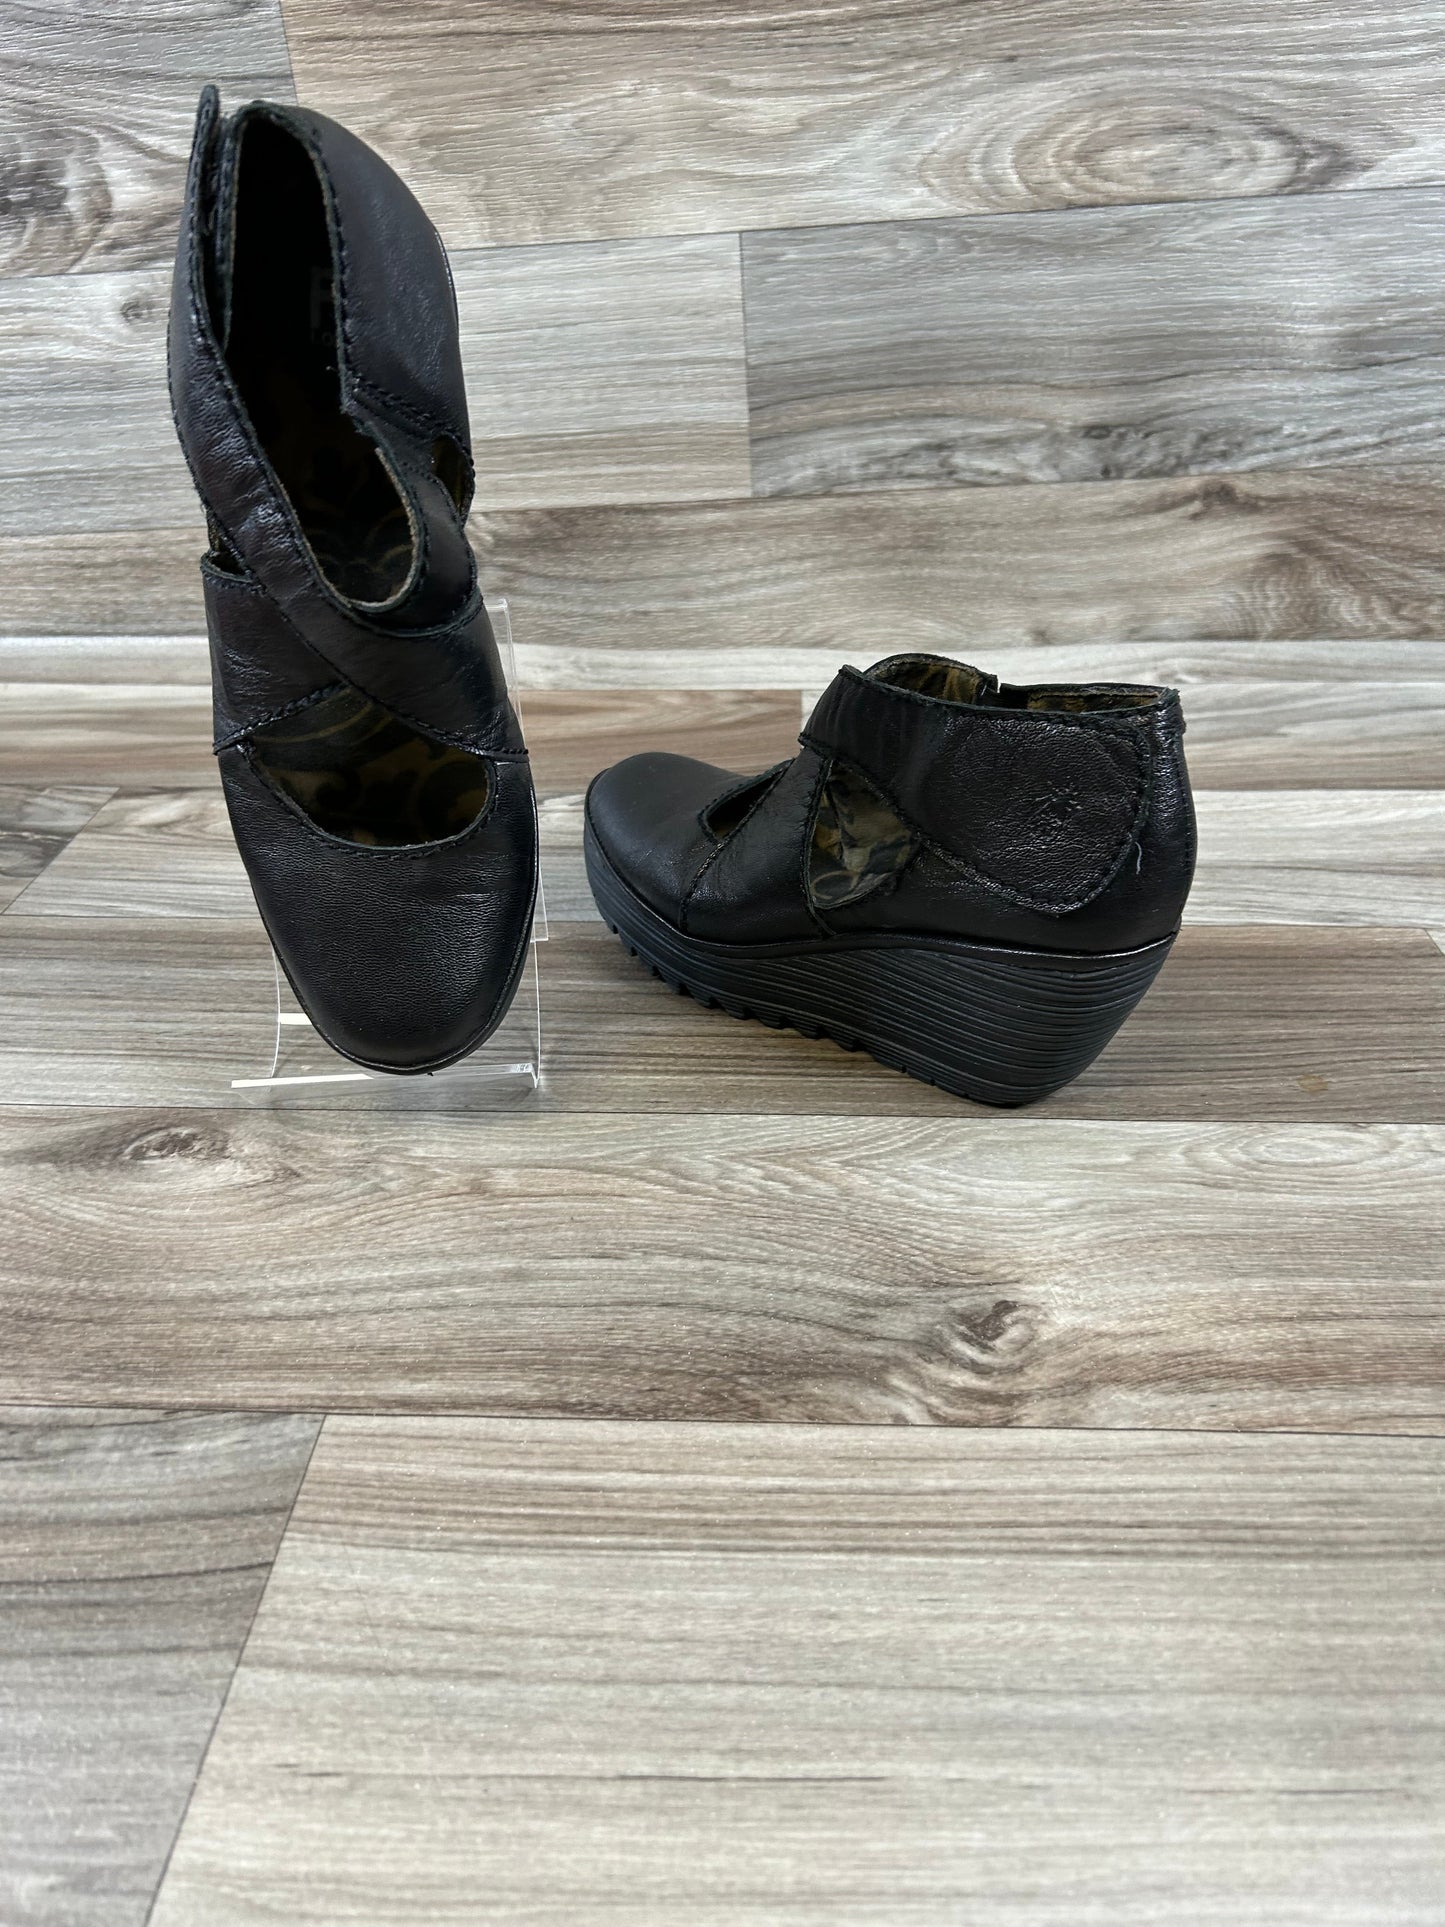 Black Shoes Heels Wedge Fly London, Size 7.5